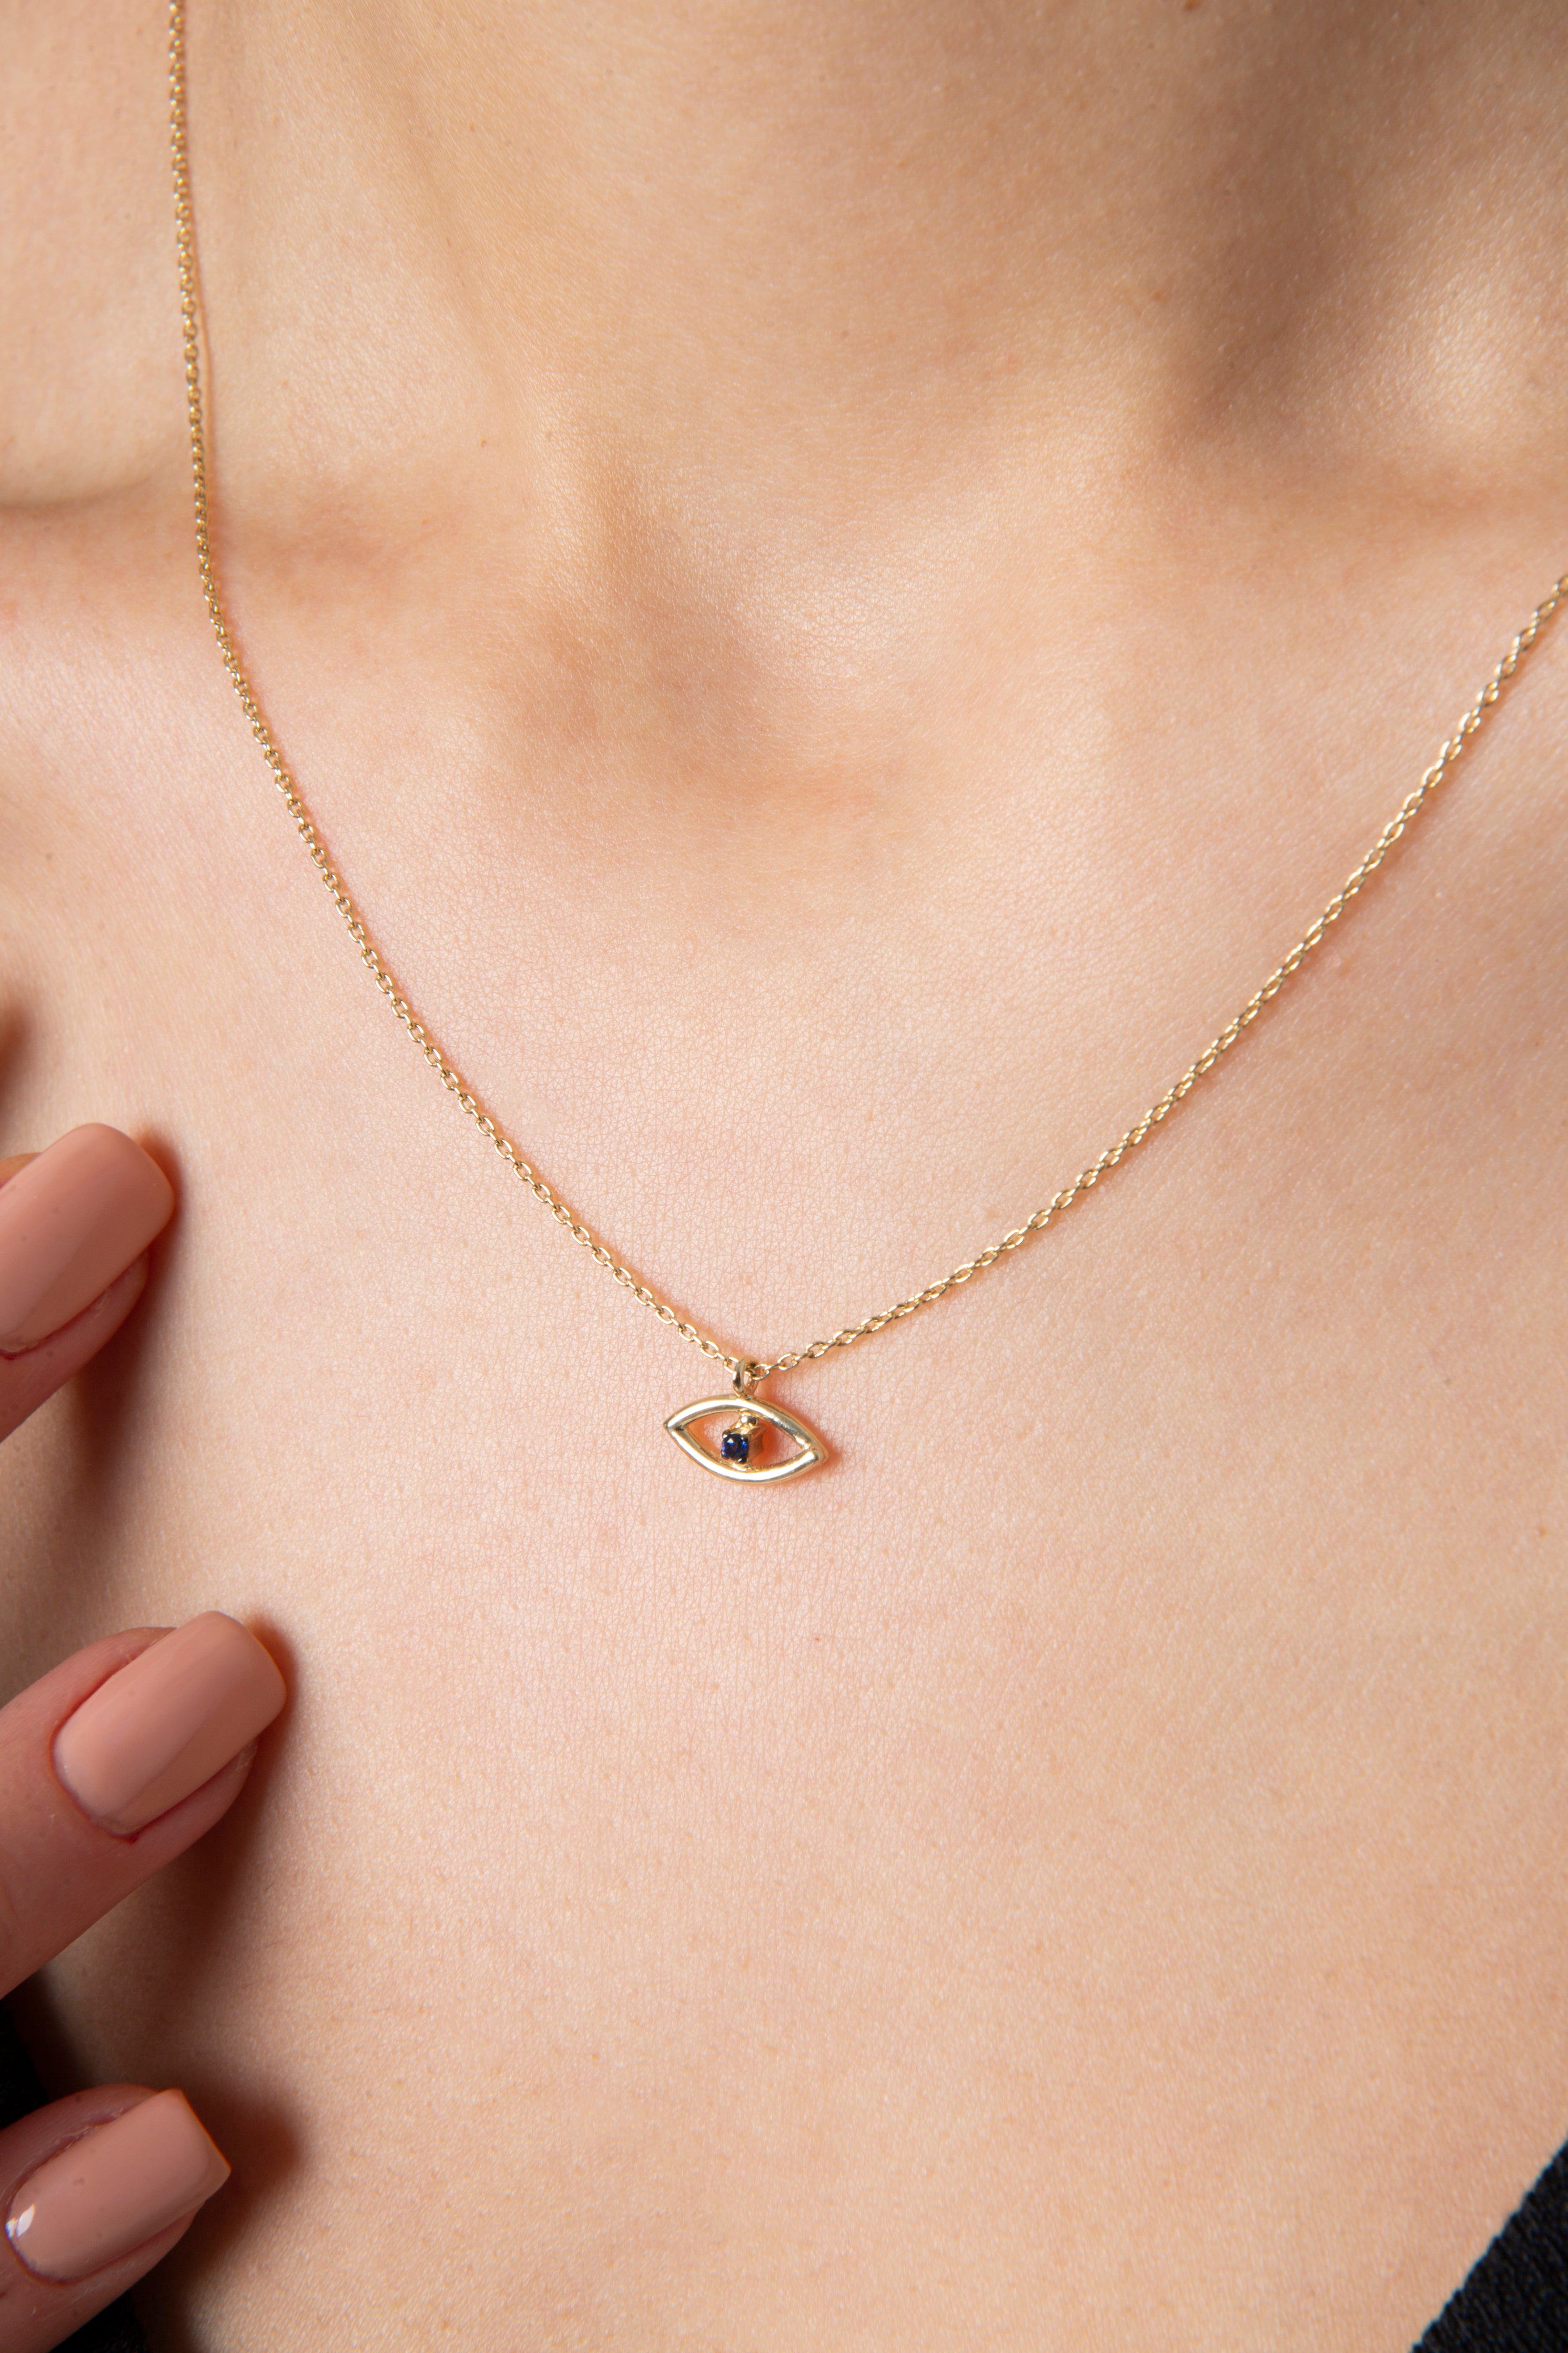 Mini Pure Magic Knot Necklace in Yellow Gold - Her Story Shop